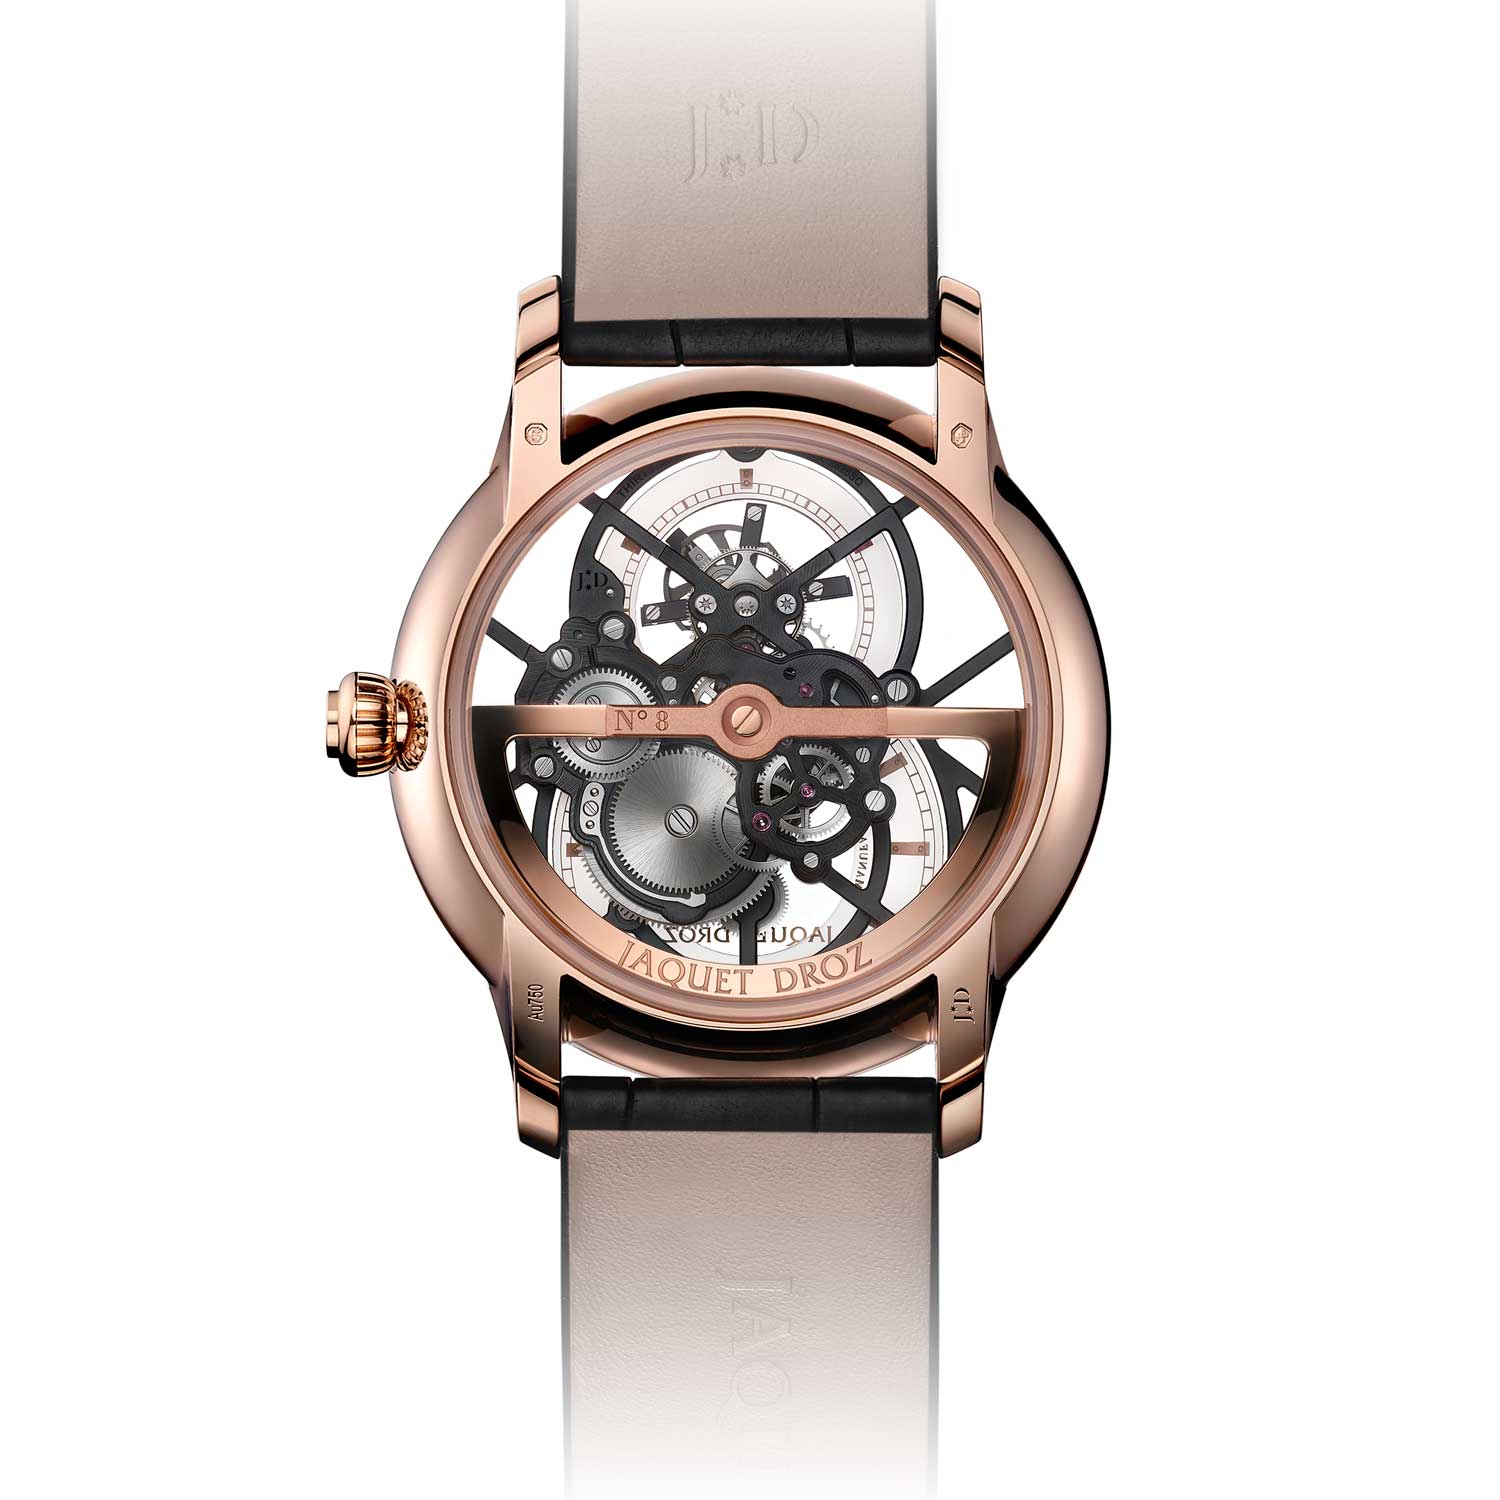 The watch is equipped with Jaquet Droz caliber 2625SQ that delivers a power reserve of seven days